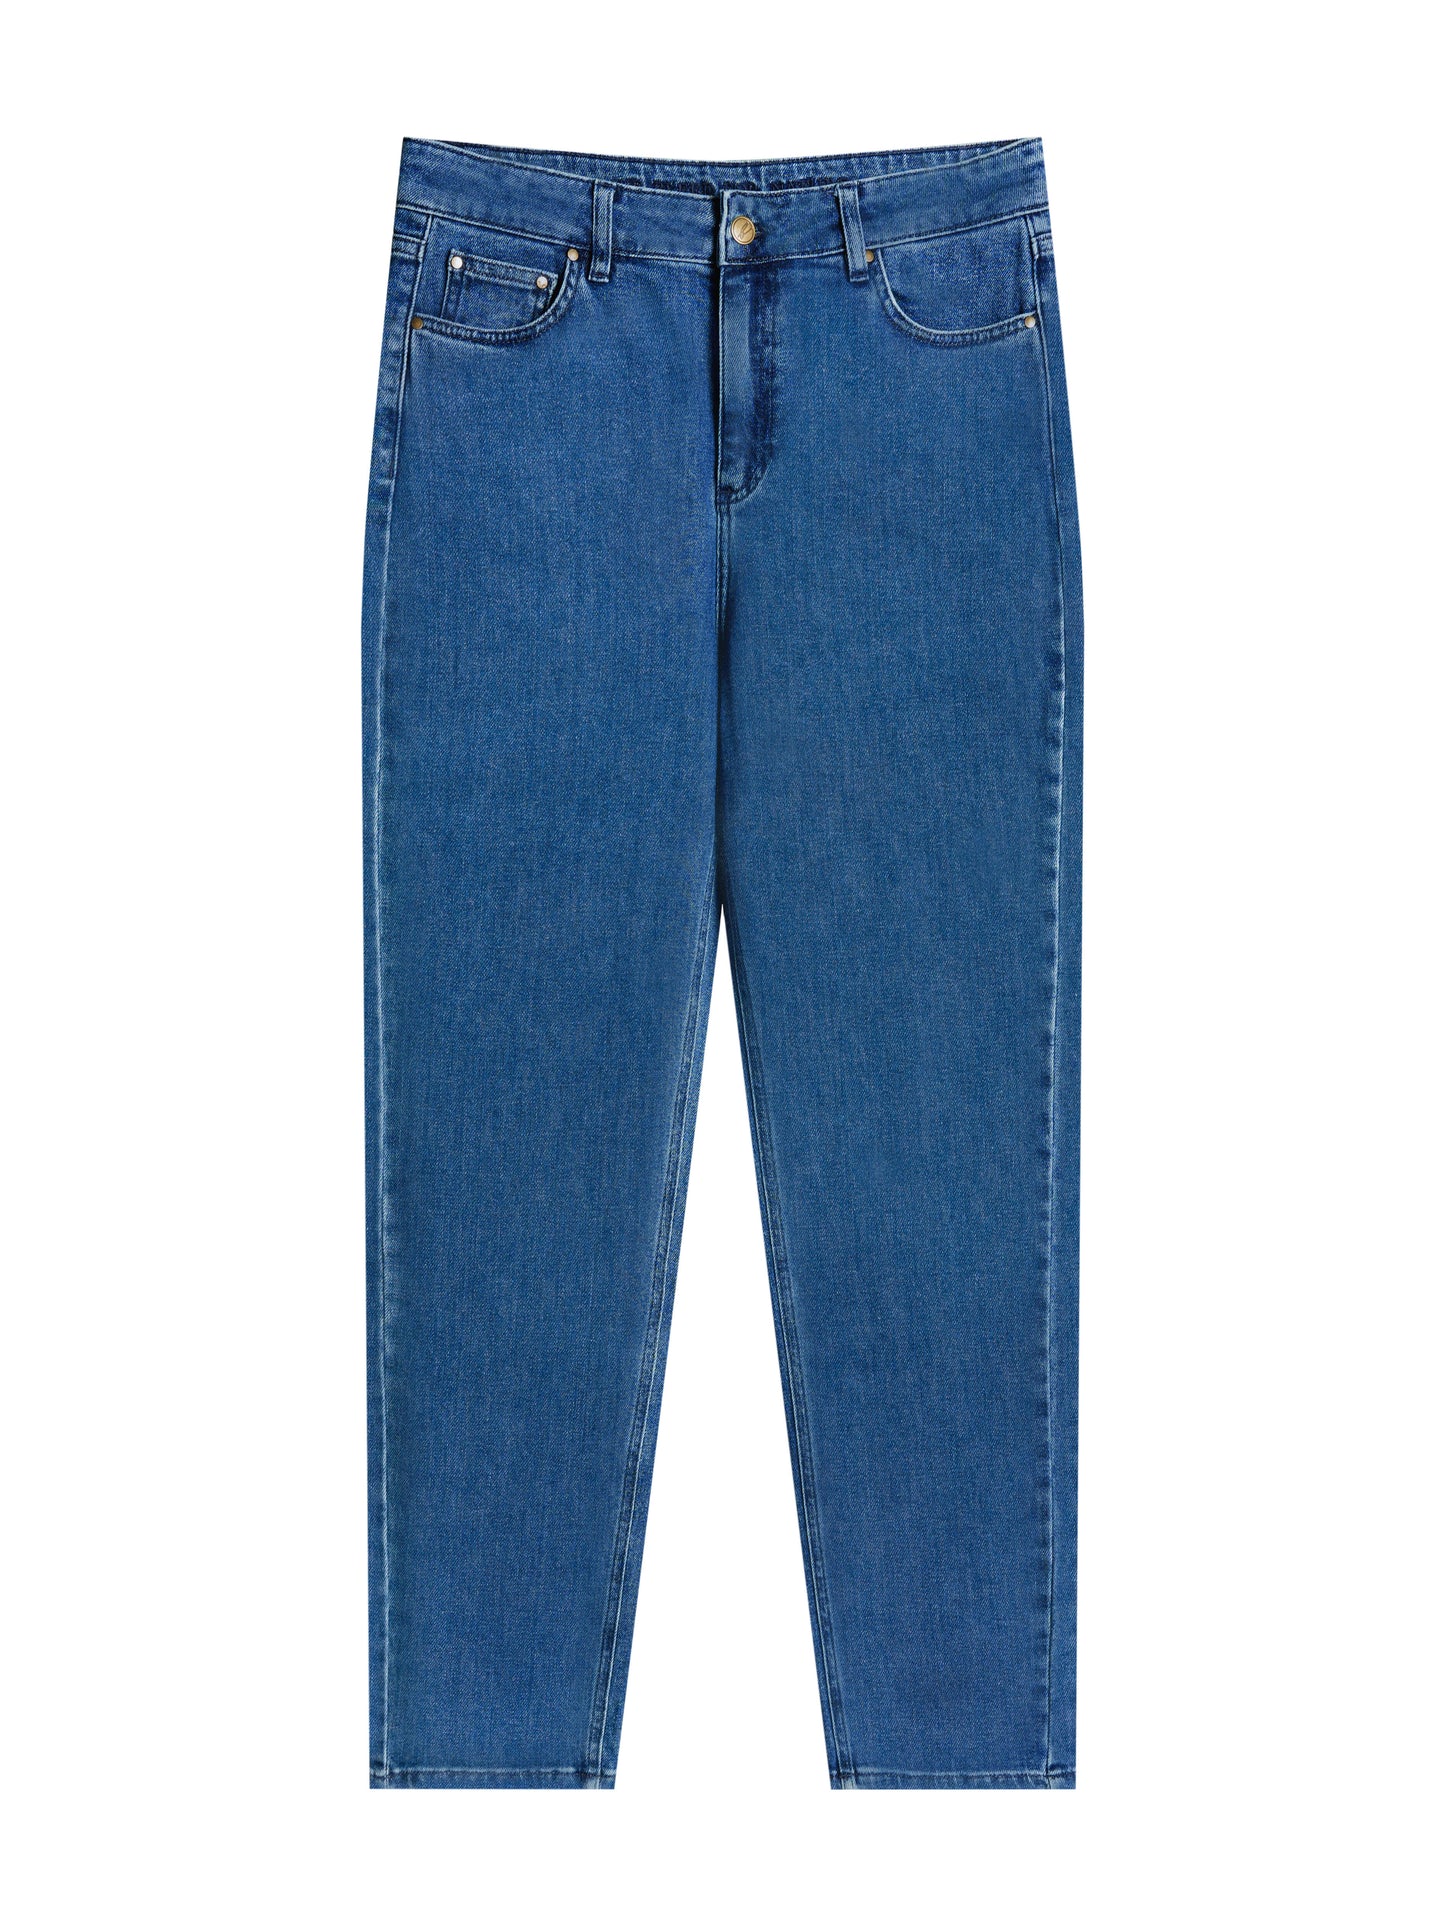 BLEED ACTIVE MOM 2DA ROOTS Jeans, denim washed